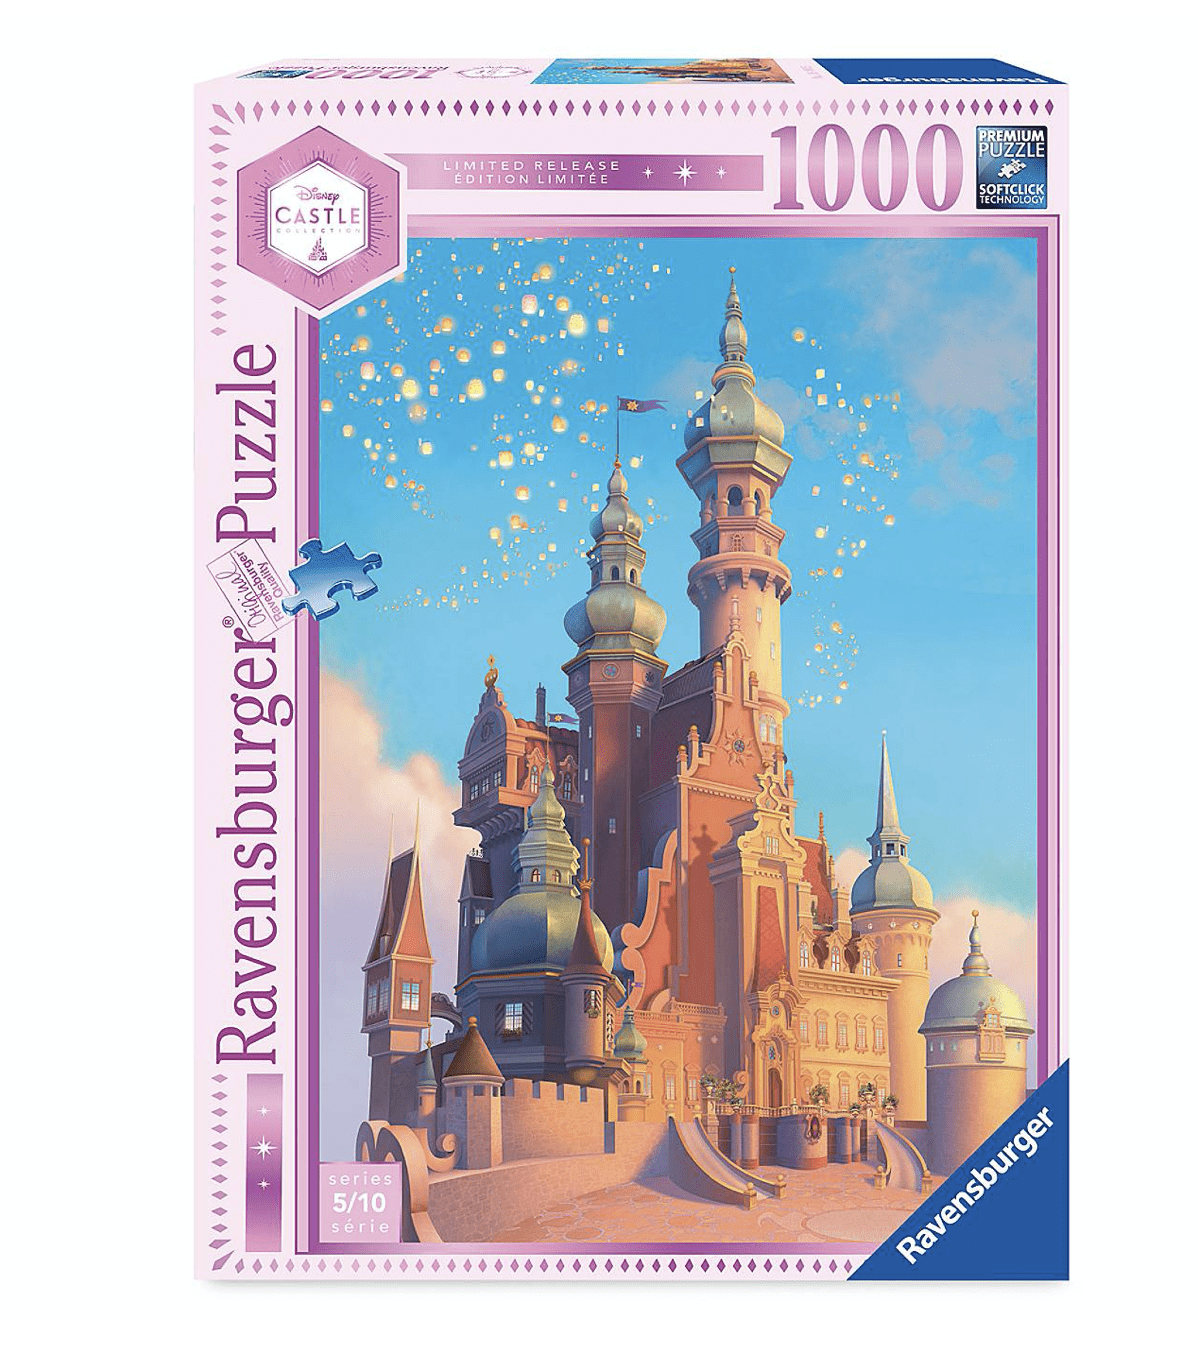 Disney Frozen Castle Collection Puzzle by Ravensburger Limited Release In Hand 